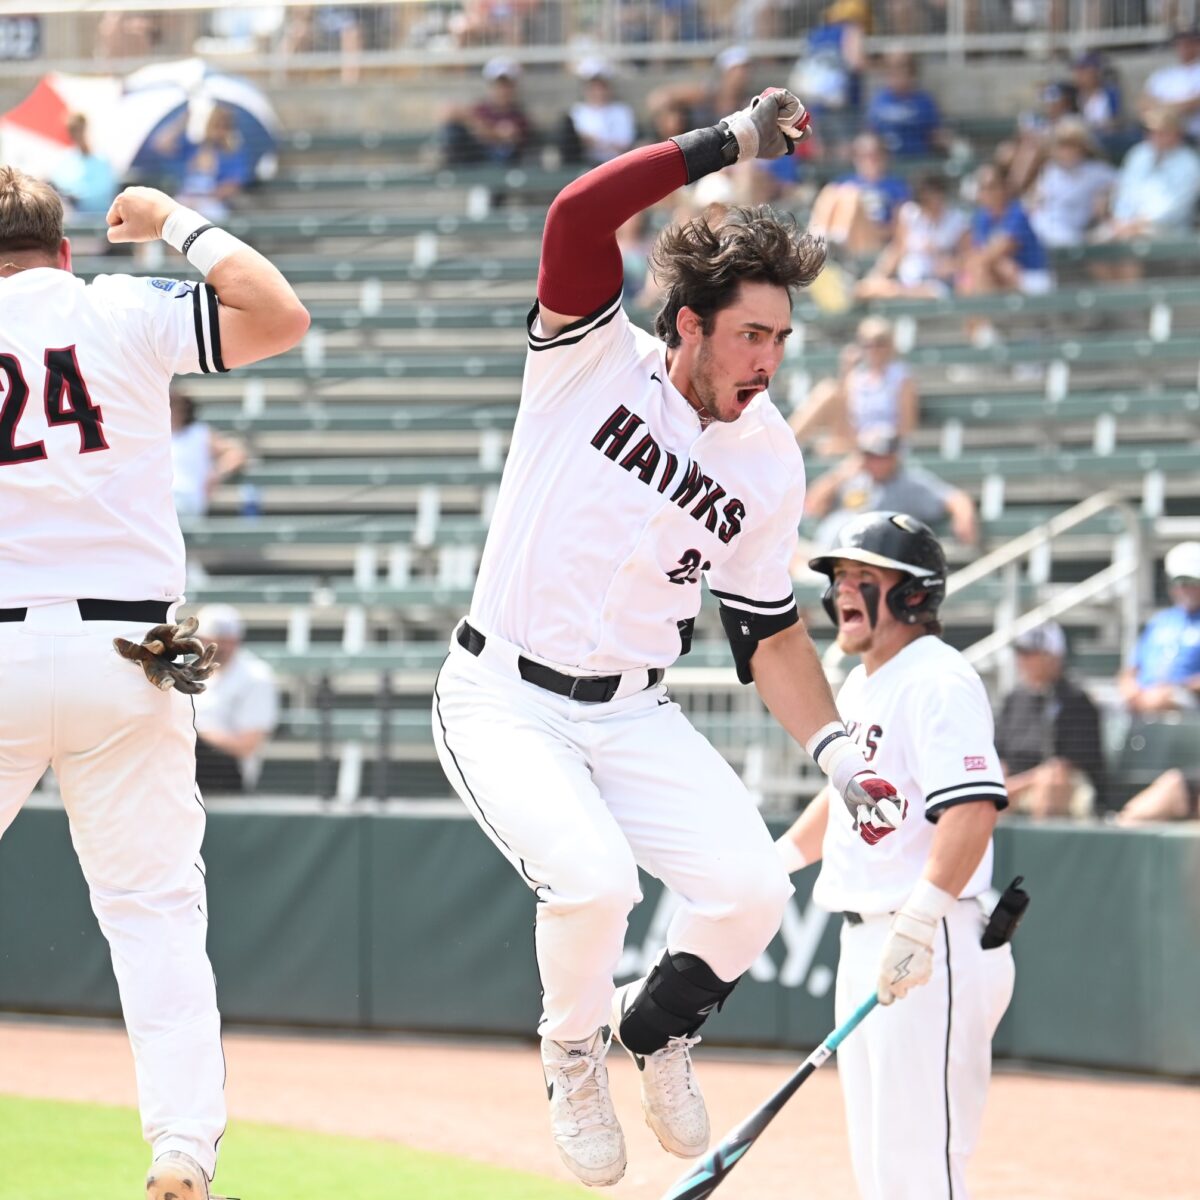 NCAA Division II baseball: Norwin product Elijah Dunn strikes again early as IUP knocks off defending champion Angelo State to move within one game of College World Series final berth